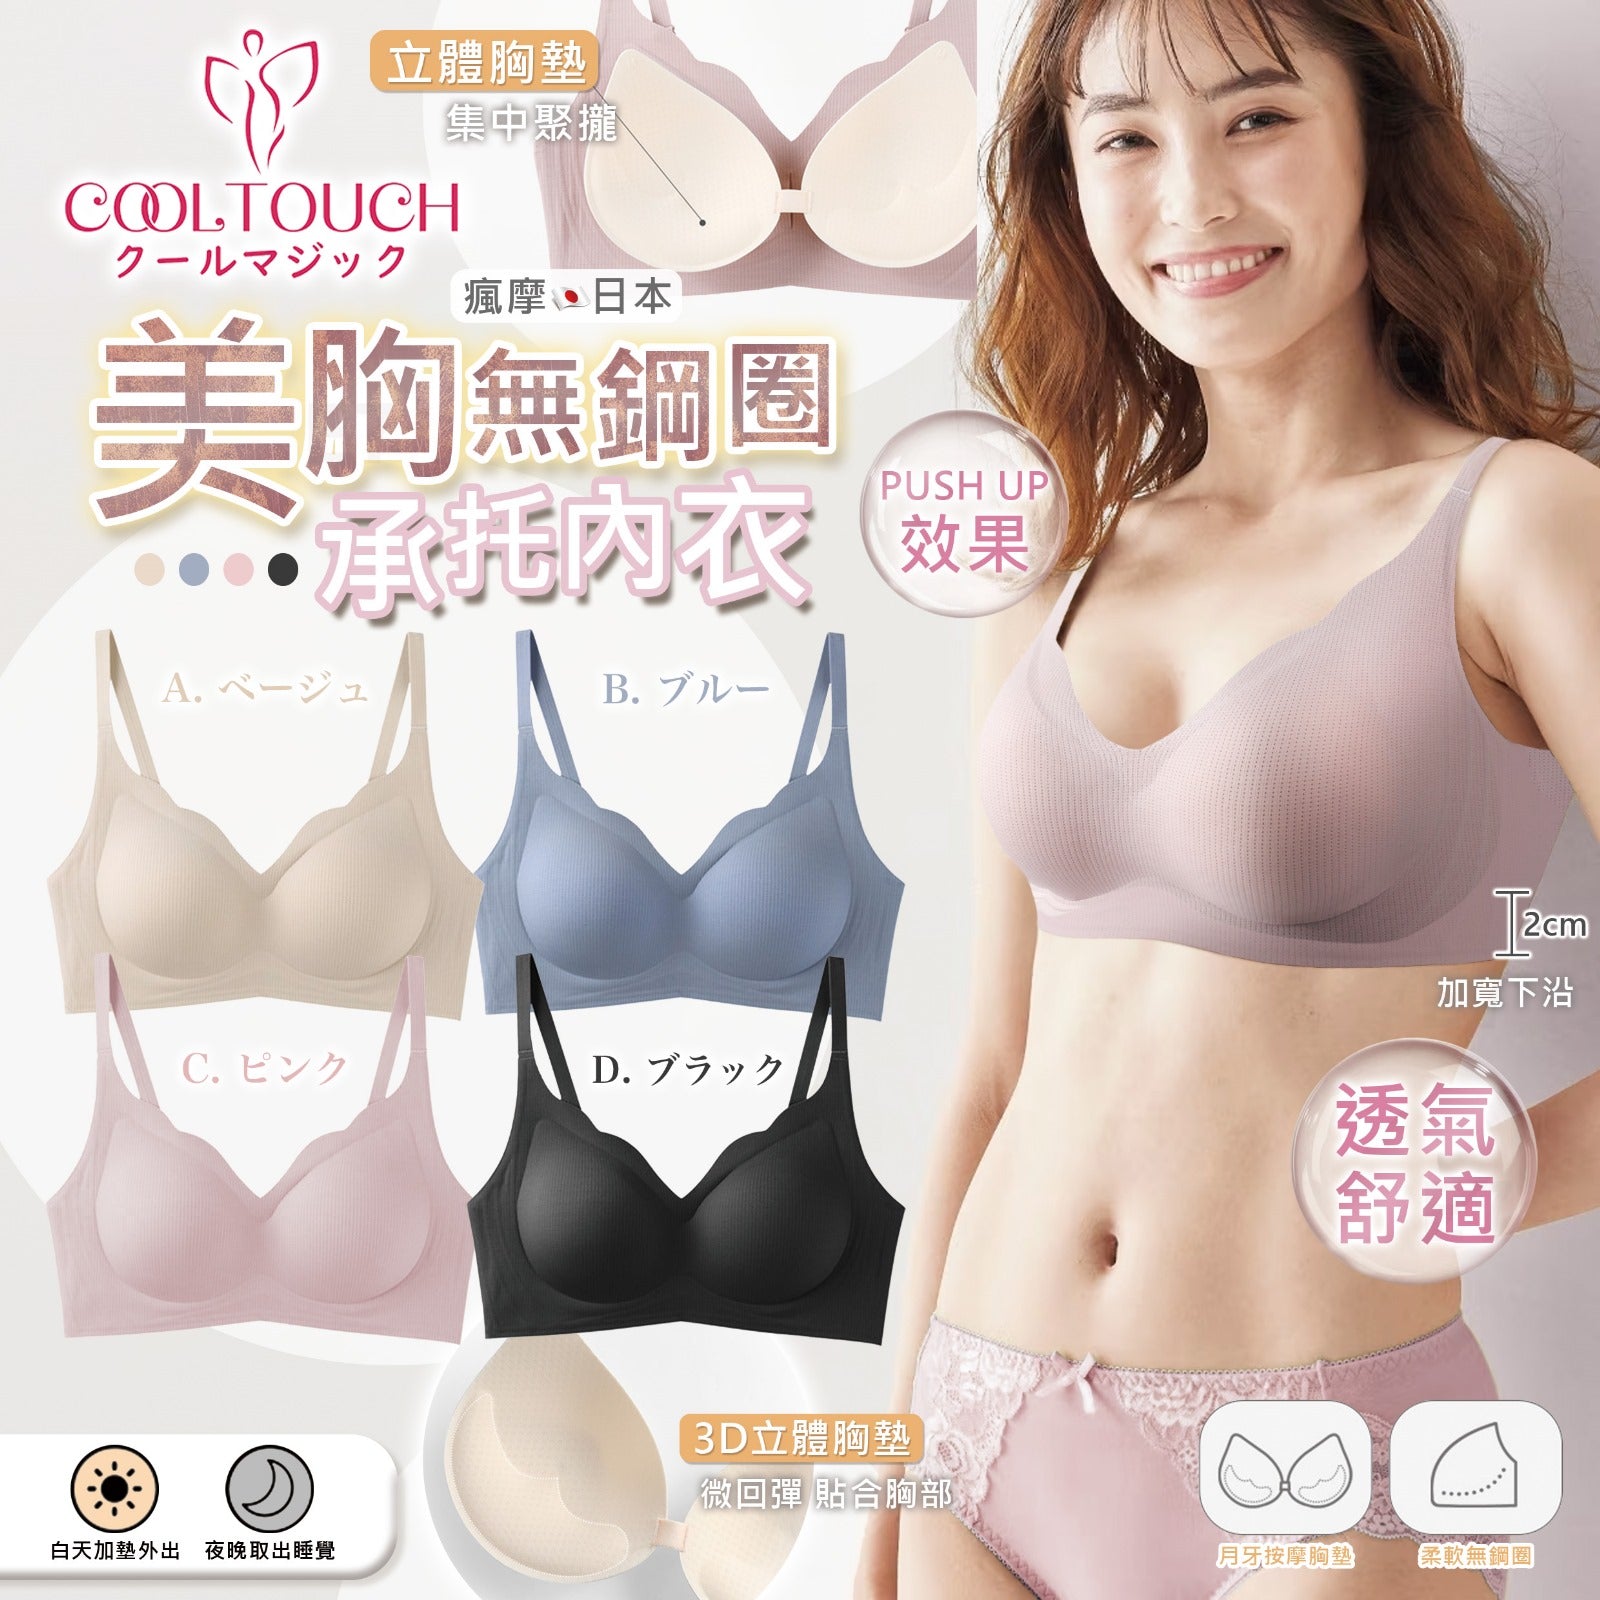 Ended at 2359 on 6/11✨Japanese Cool touch push up bra for breast enhan –  娉婷貿易公司 Exquisite Beauty Trading Company